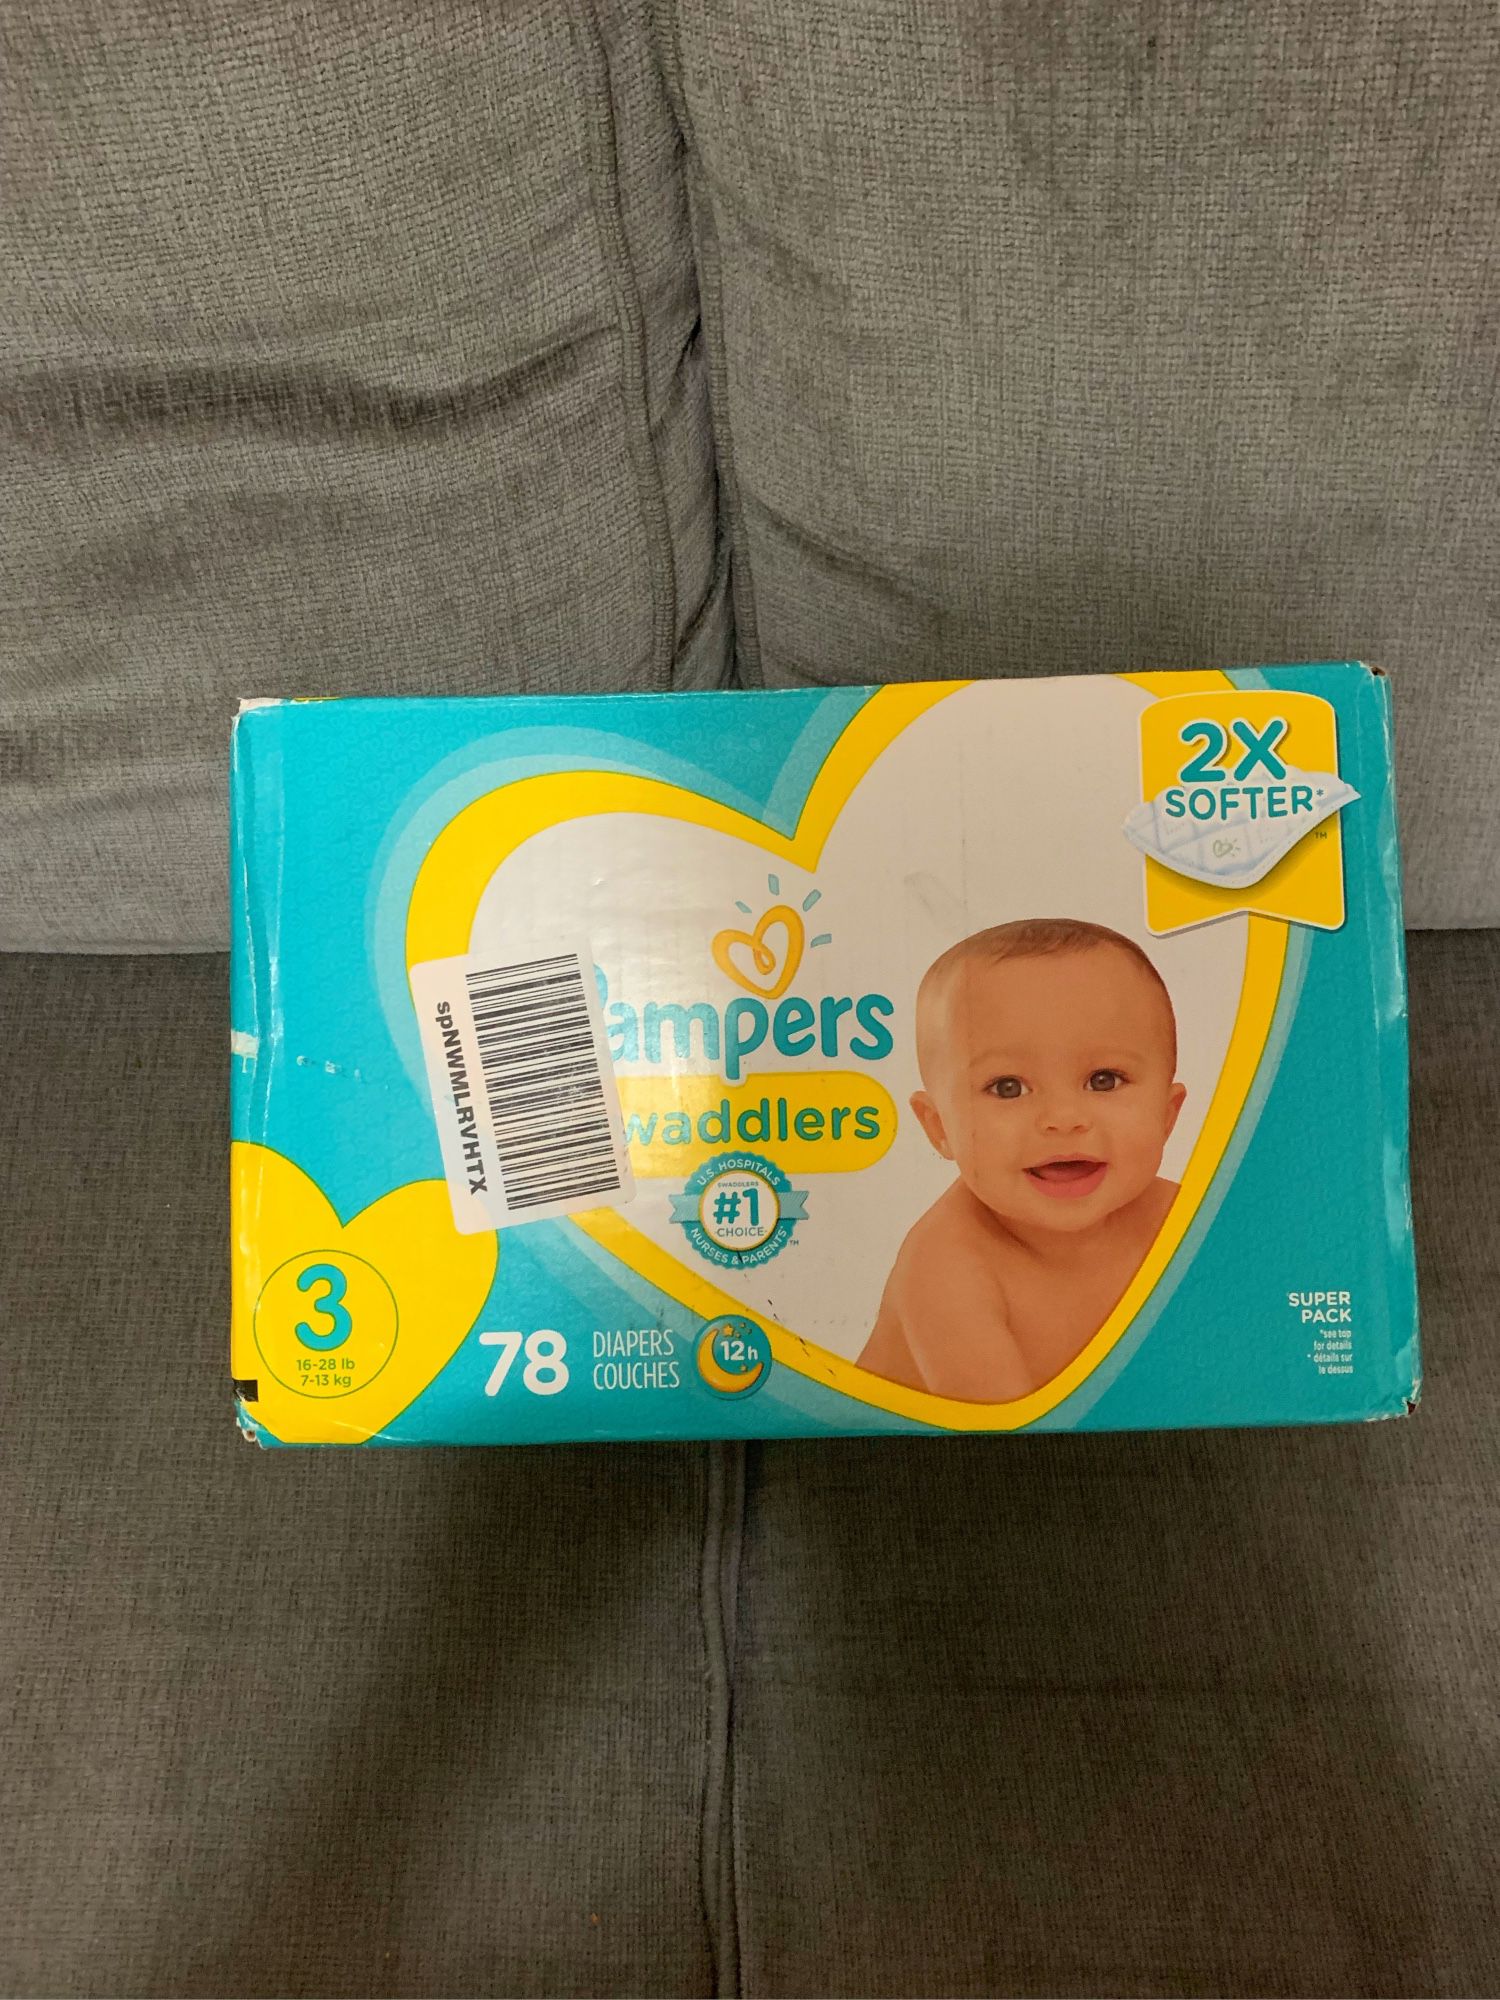 Pampers Swaddlers Size 3